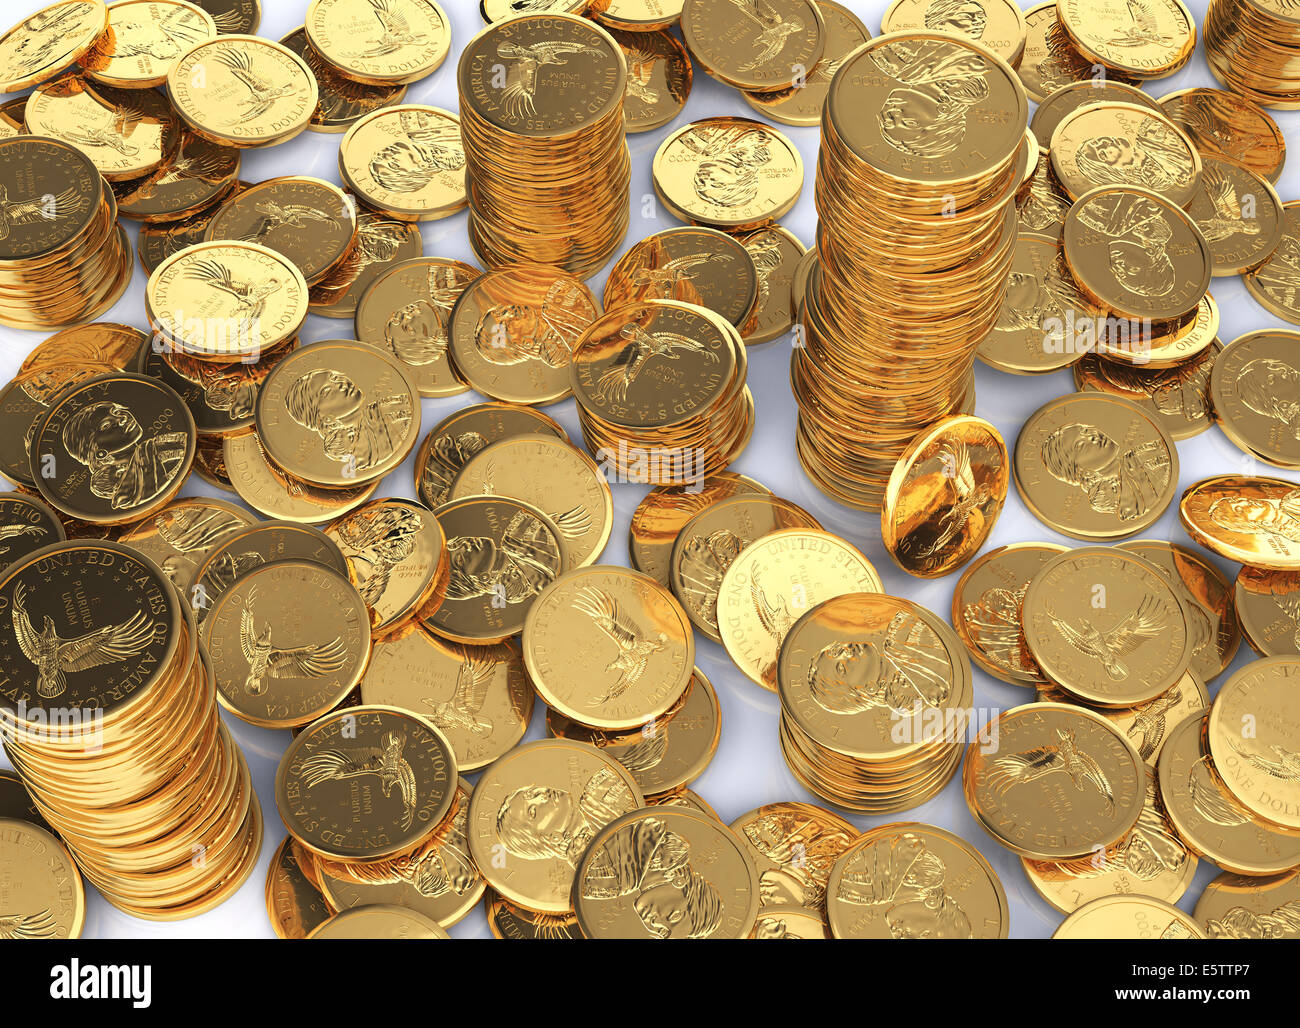 Gold dollar coins spread on a white surface and few stacks between them. Stock Photo